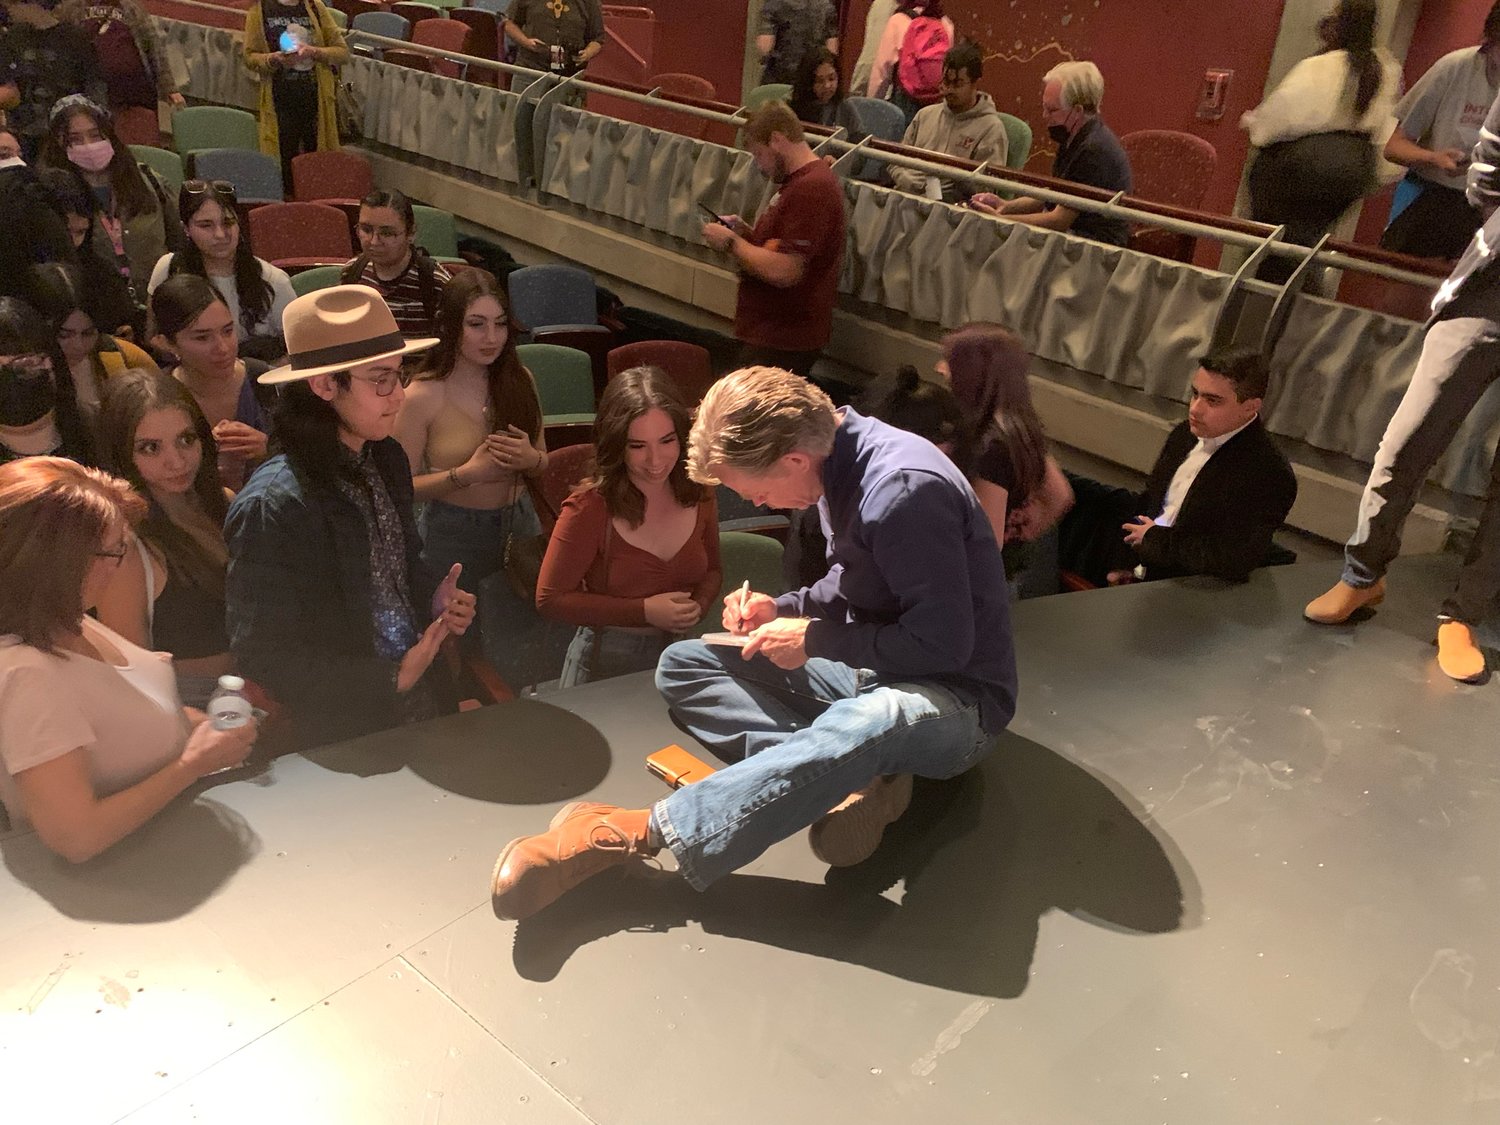 Actor William H. Macy signs items for attendees, mostly New Mexico State University students, at his March 3 event held at the Center For the Arts.